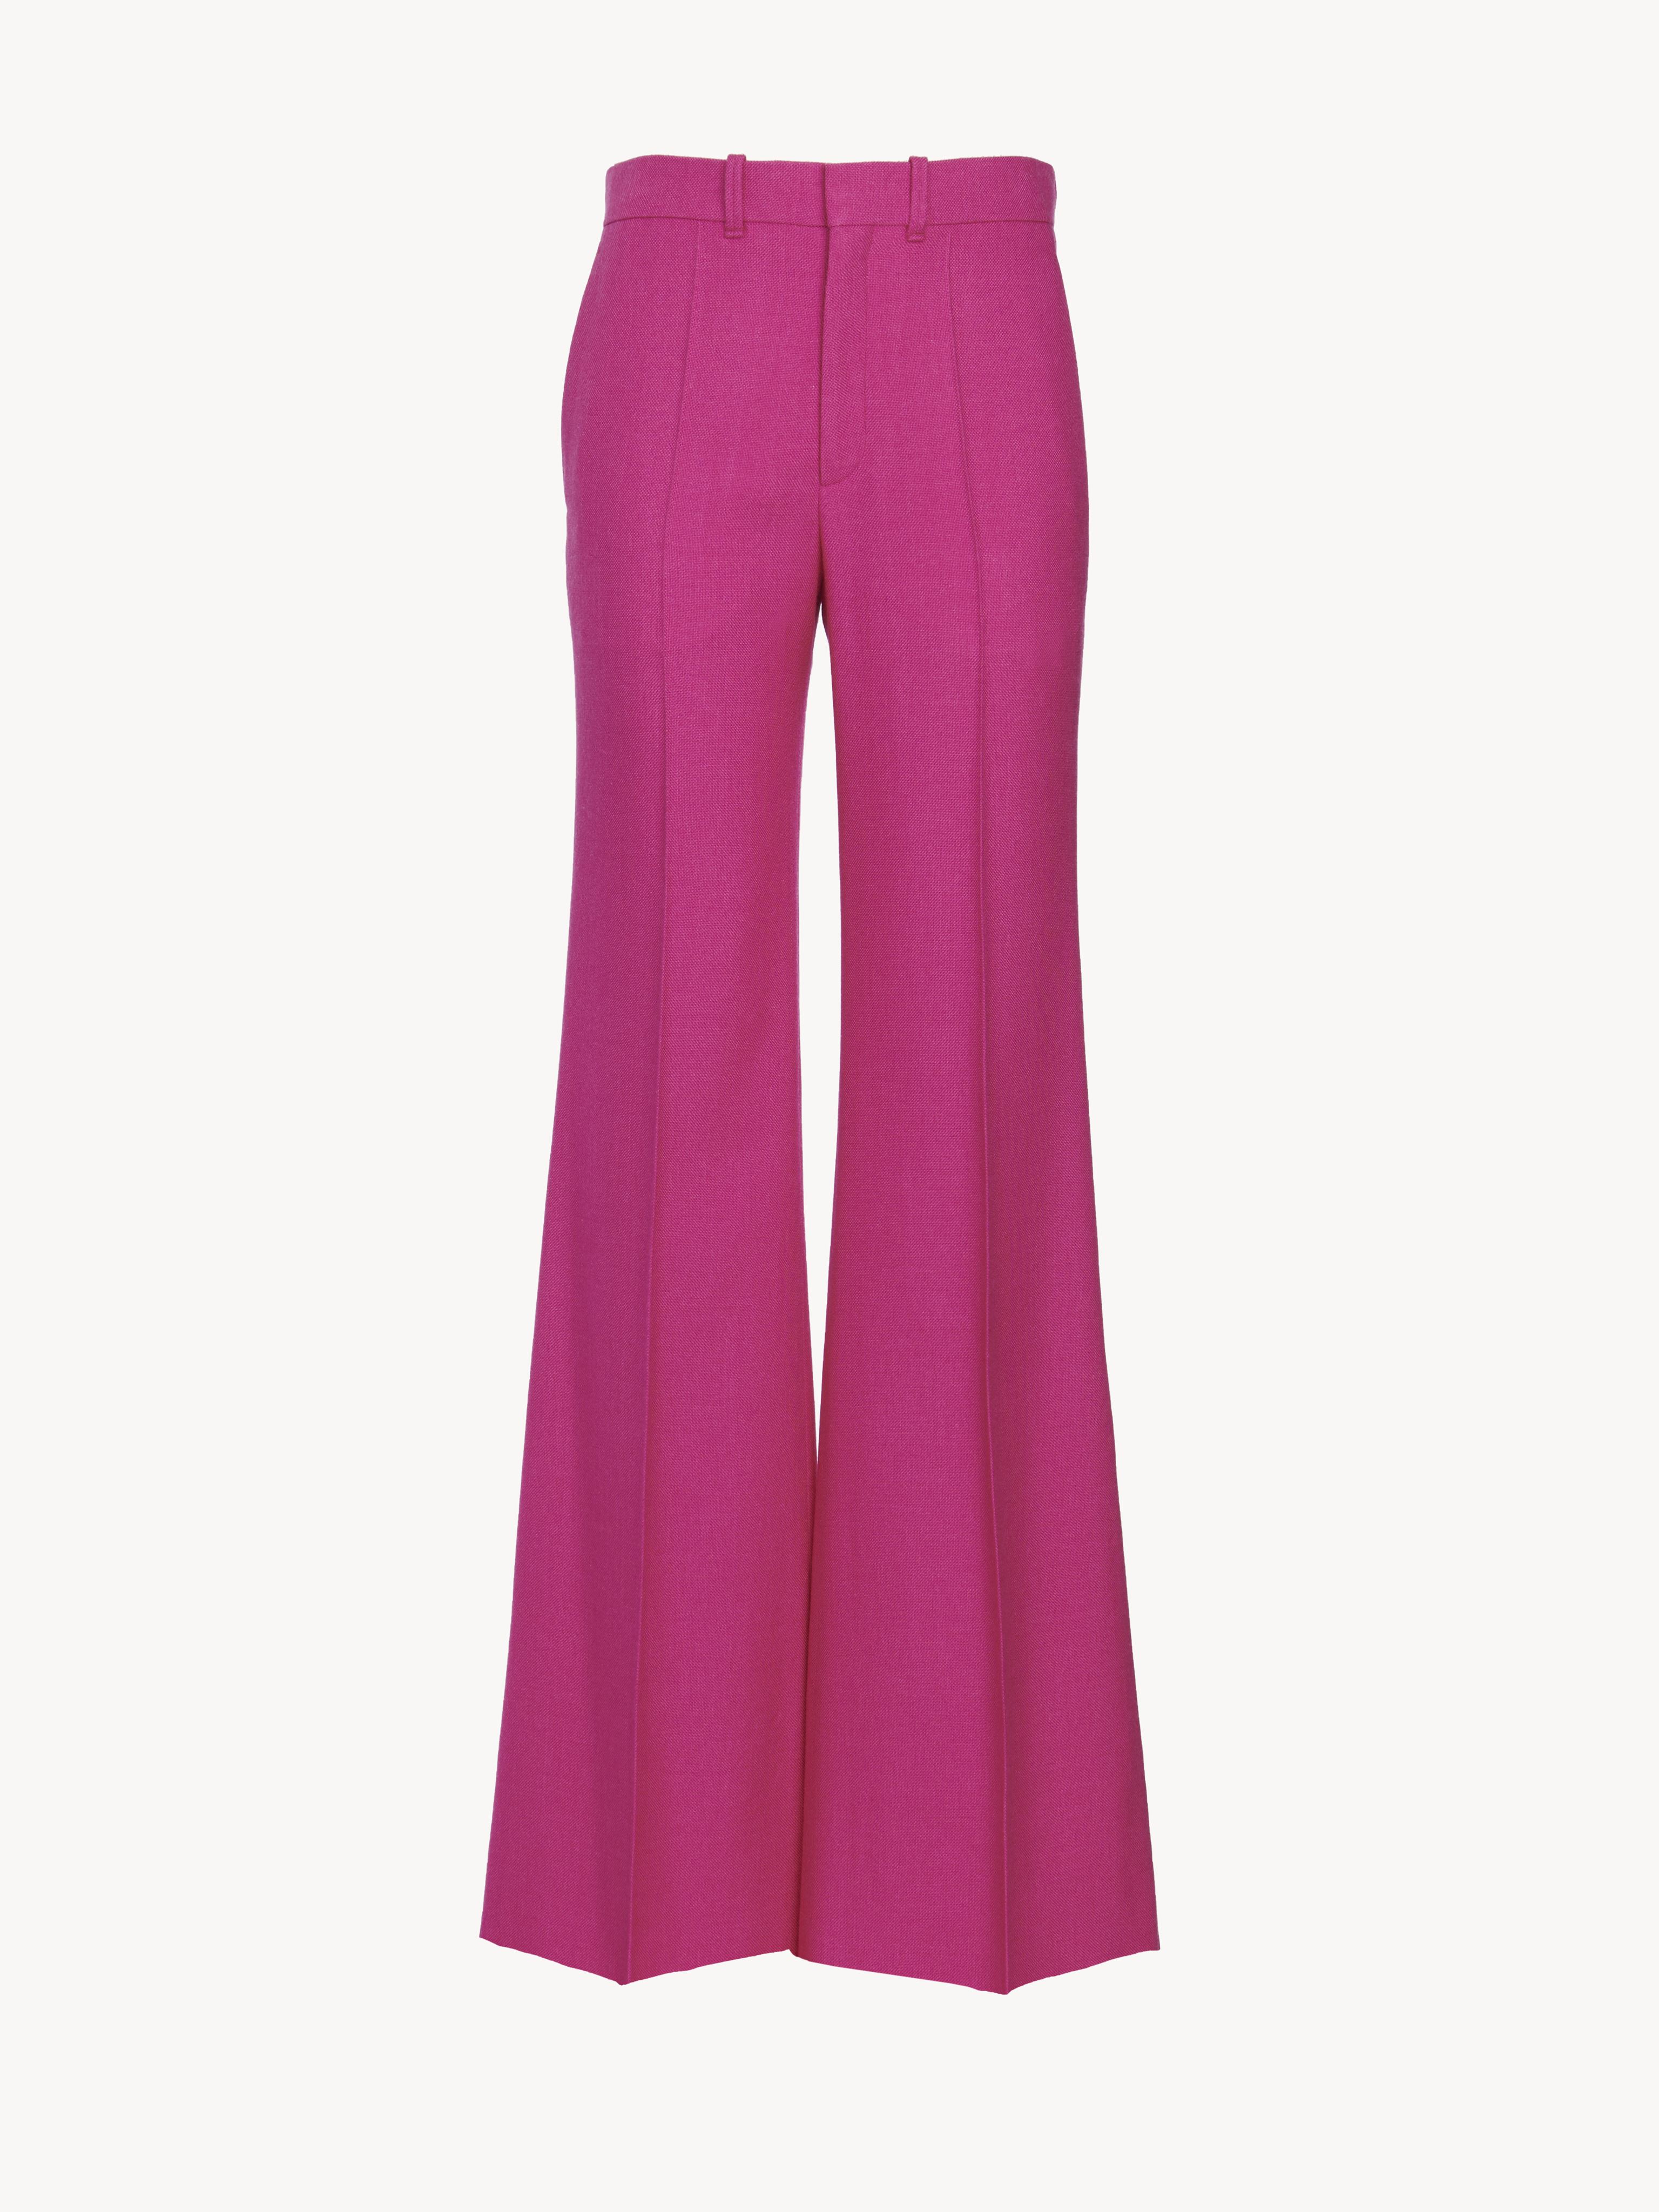 CHLOÉ FLARED PANTS PINK SIZE 8 70% WOOL, 17% SILK, 13% CASHMERE